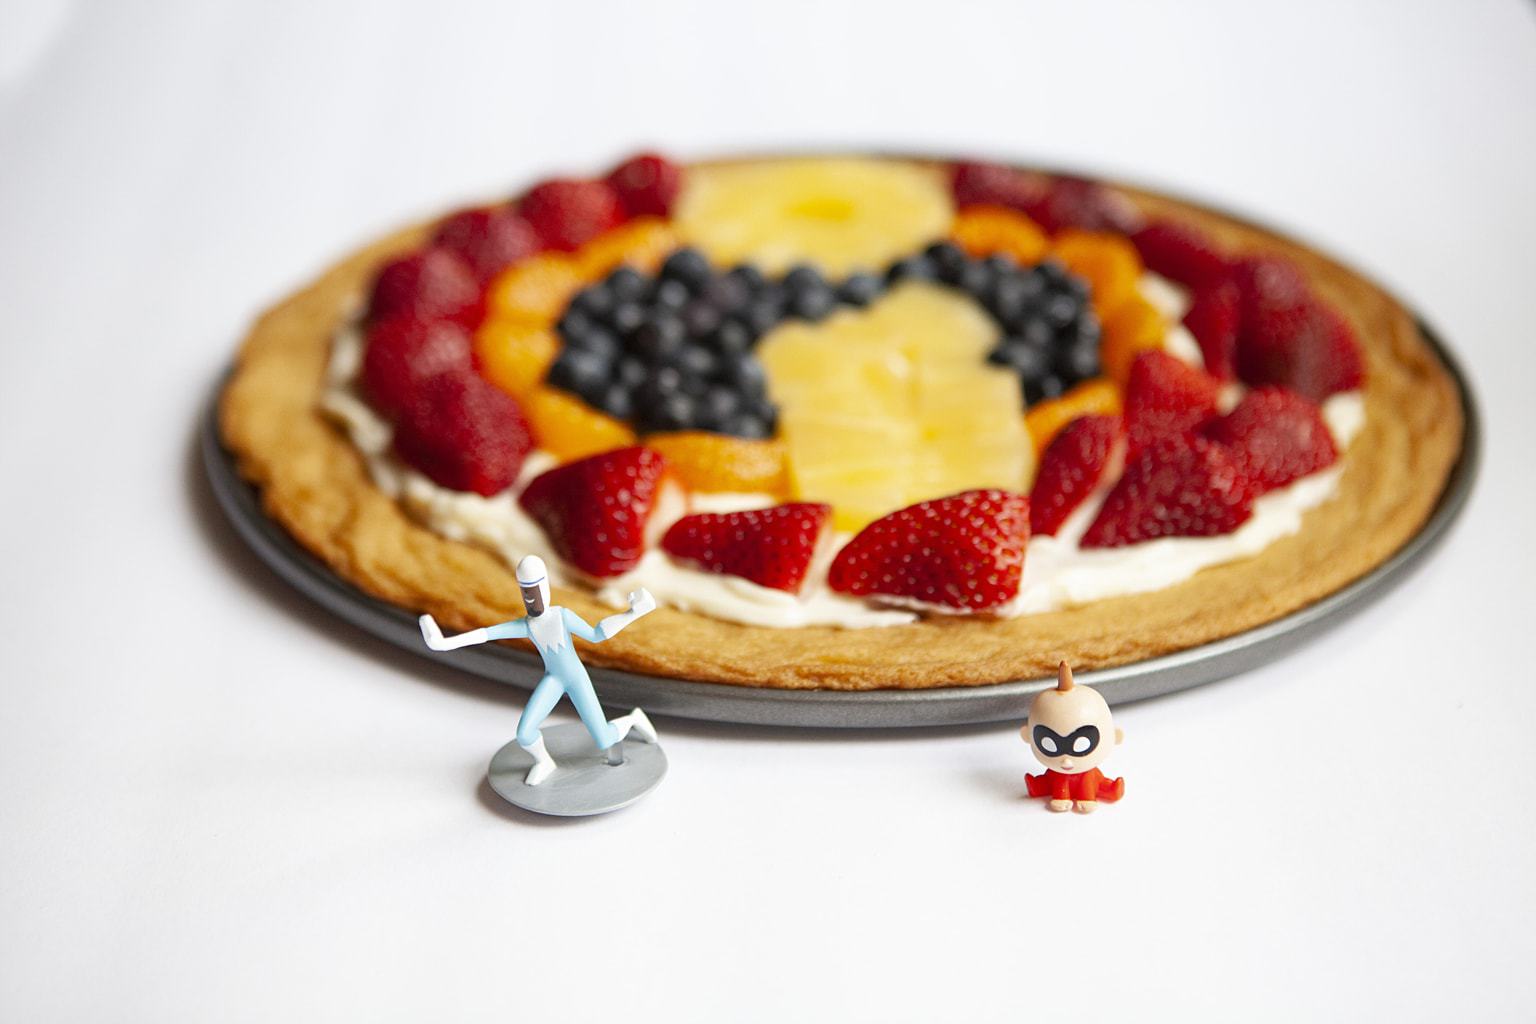 Sugar cookie Fruit Pizza Inspired by Incredibles Movie